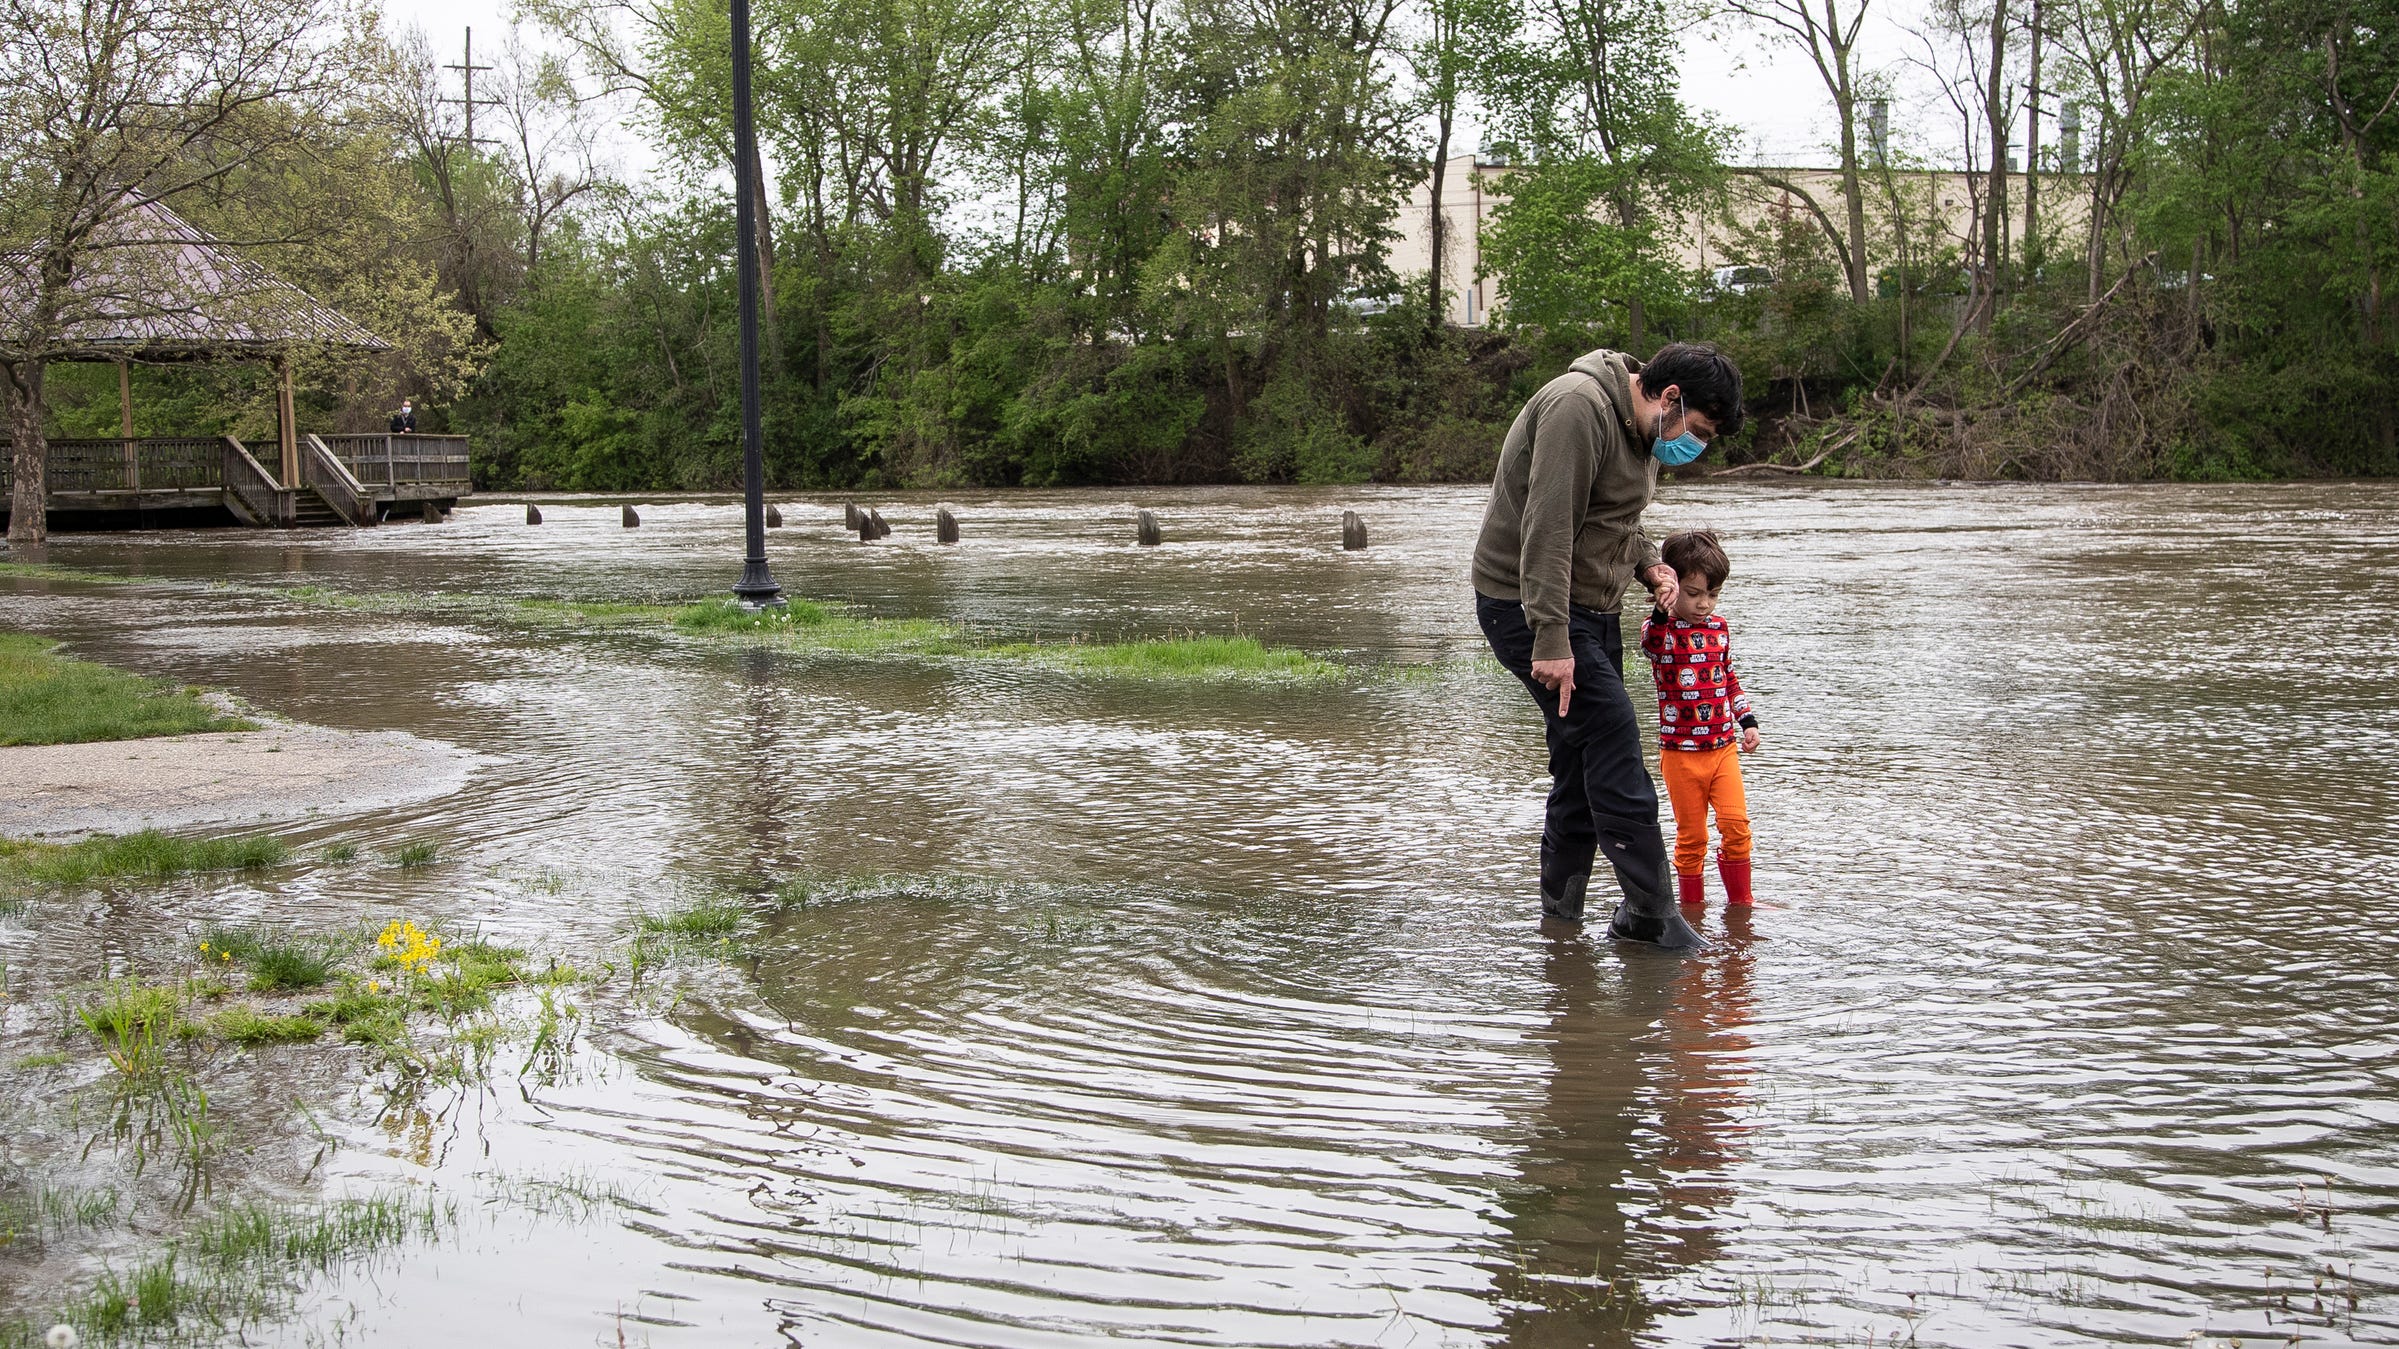 River flooding causes evacuations in Mich. as heavy rain sets records